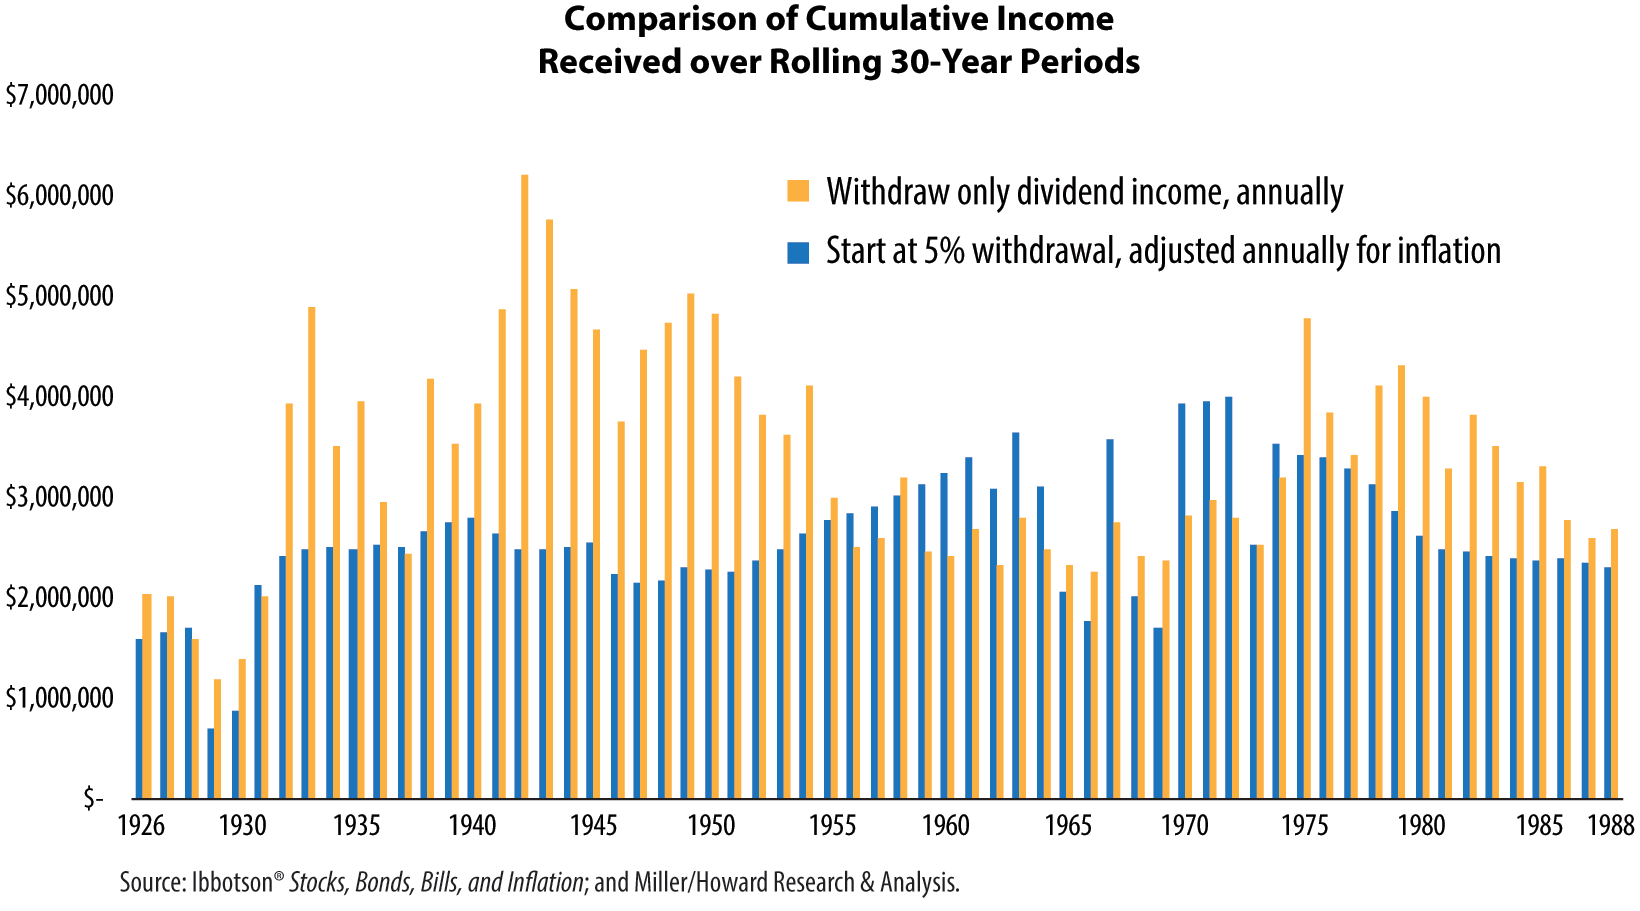 Cumulative income over rolling 30-year periods